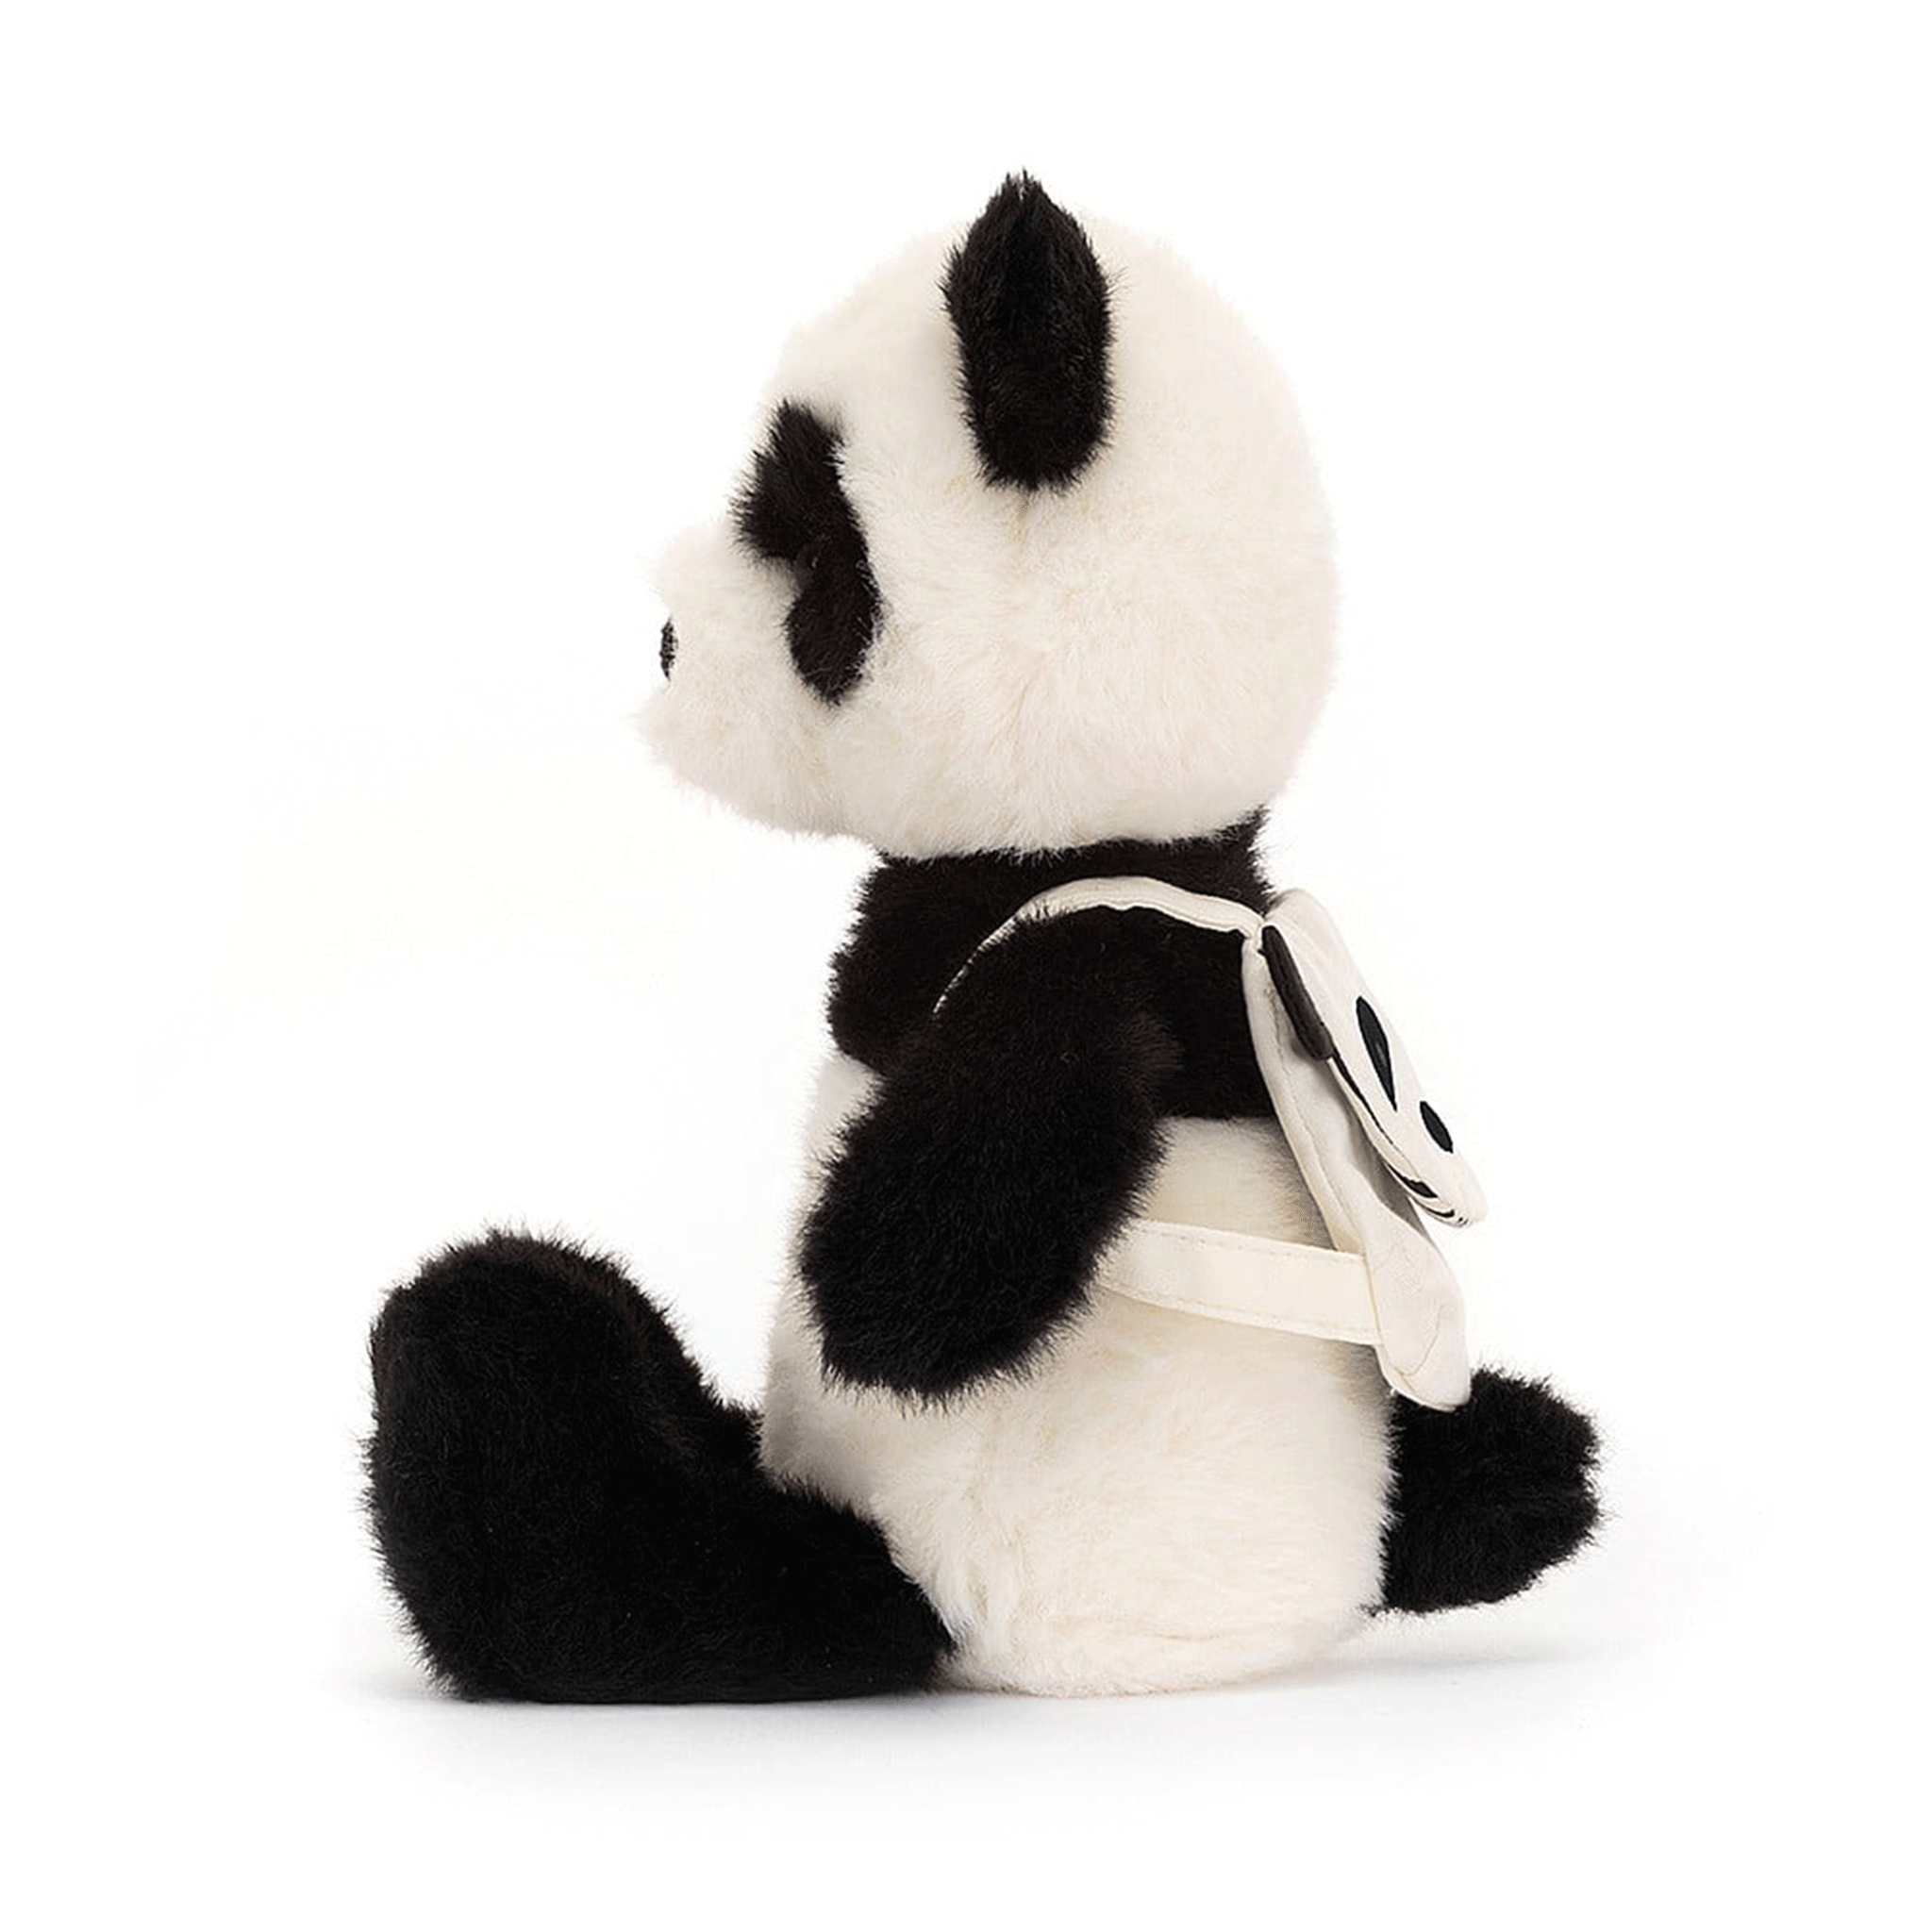 On a white background is a black and white panda stuffed toy wearing a panda backpack.